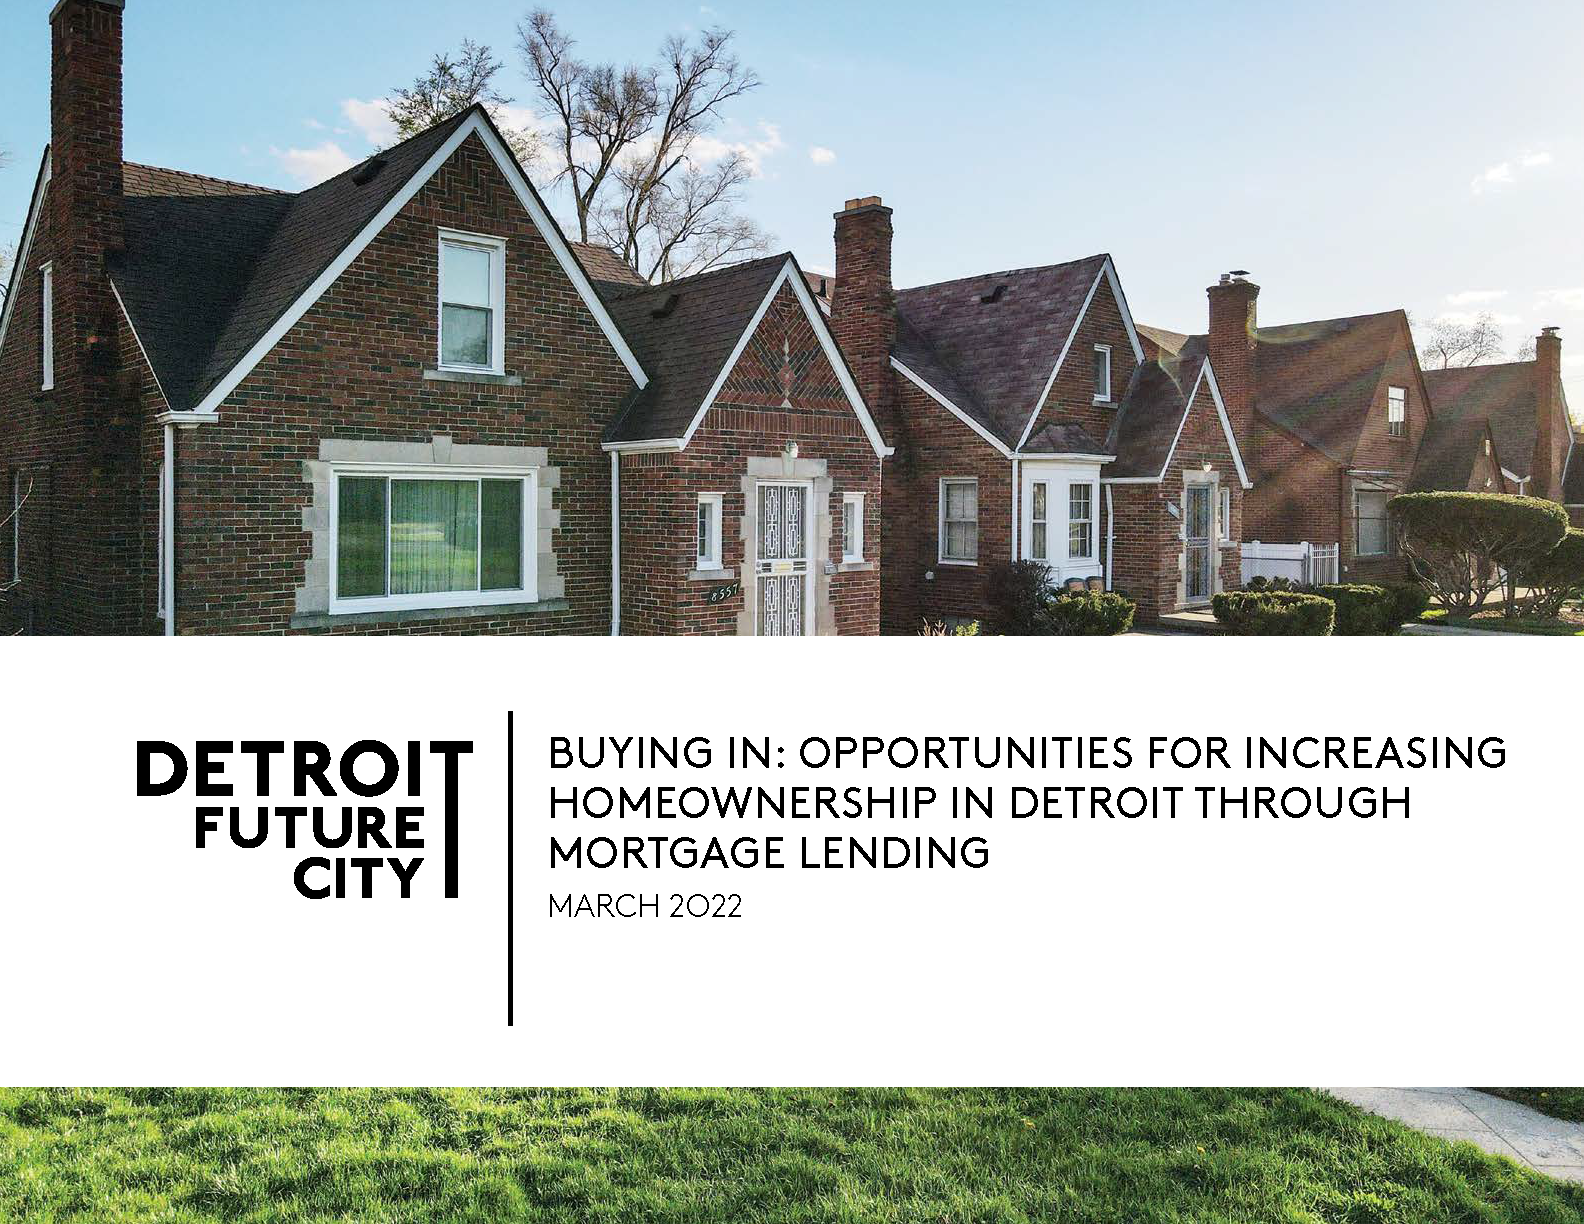 https://detroitfuturecity.com/wp-content/uploads/2022/03/Buying-In-DFC-Report-Title-Page.png